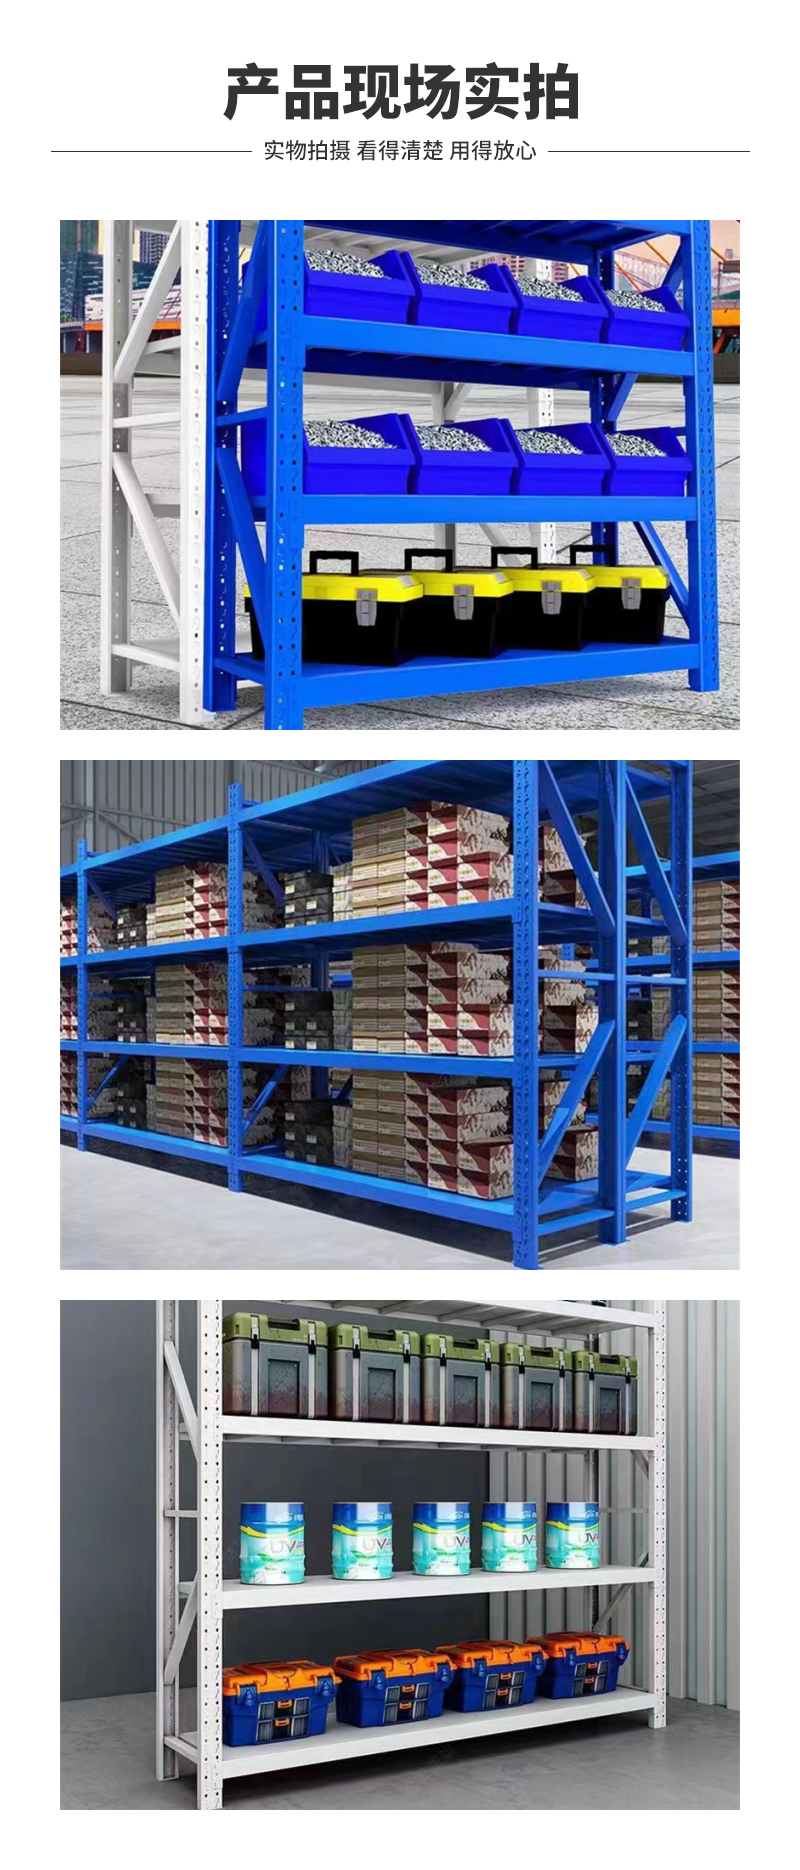 Warehouse pickling and phosphating crossbeam type storage rack, cleverly fixed rack, customized heavy storage rack